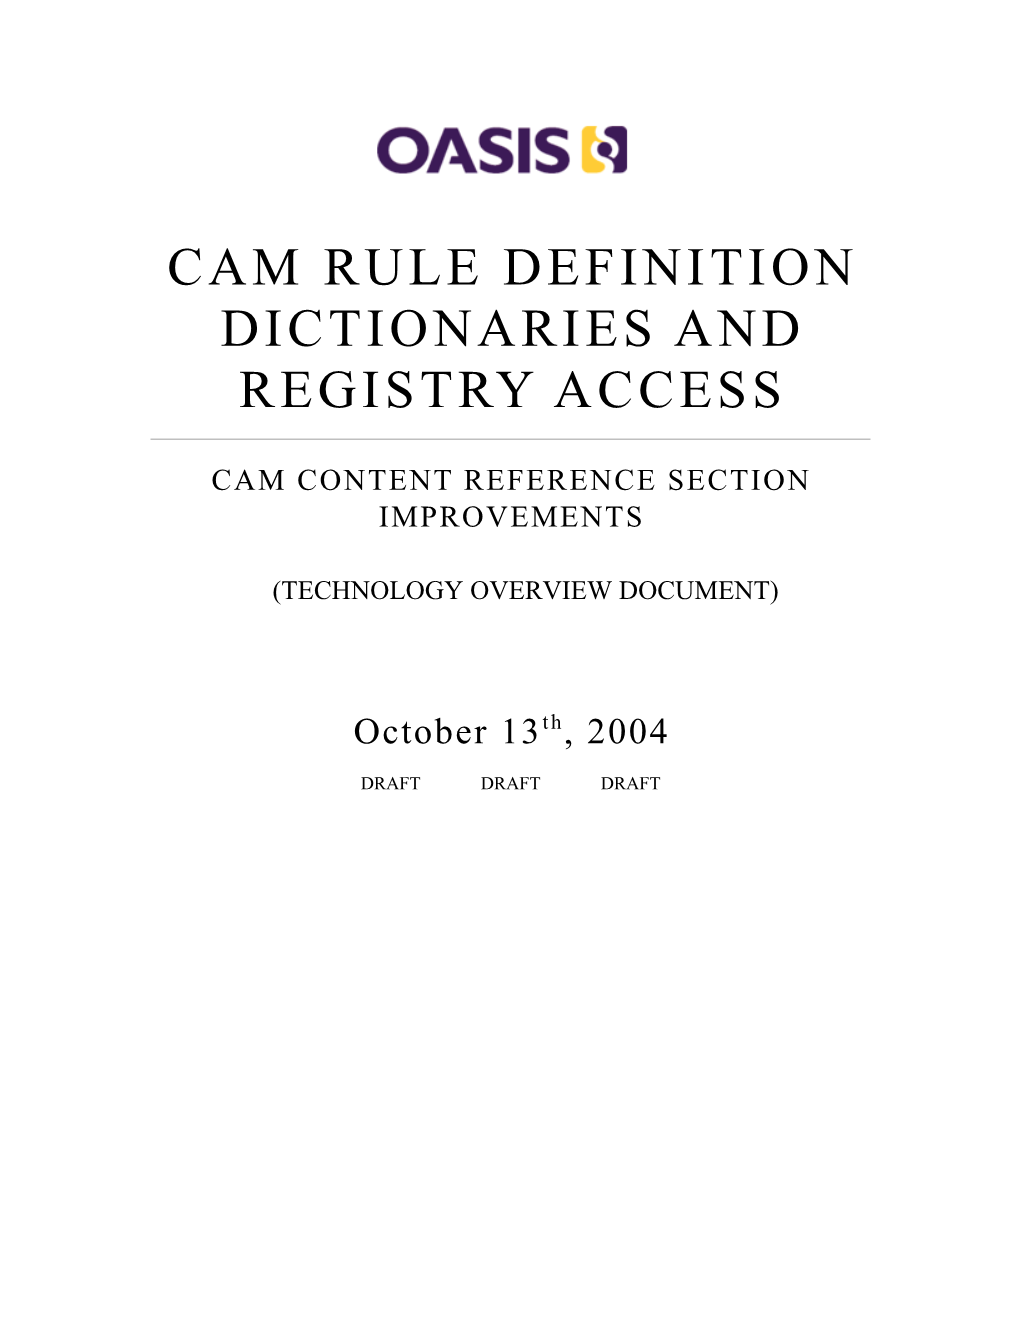 Camrule Definition Dictionaries and Registry Access